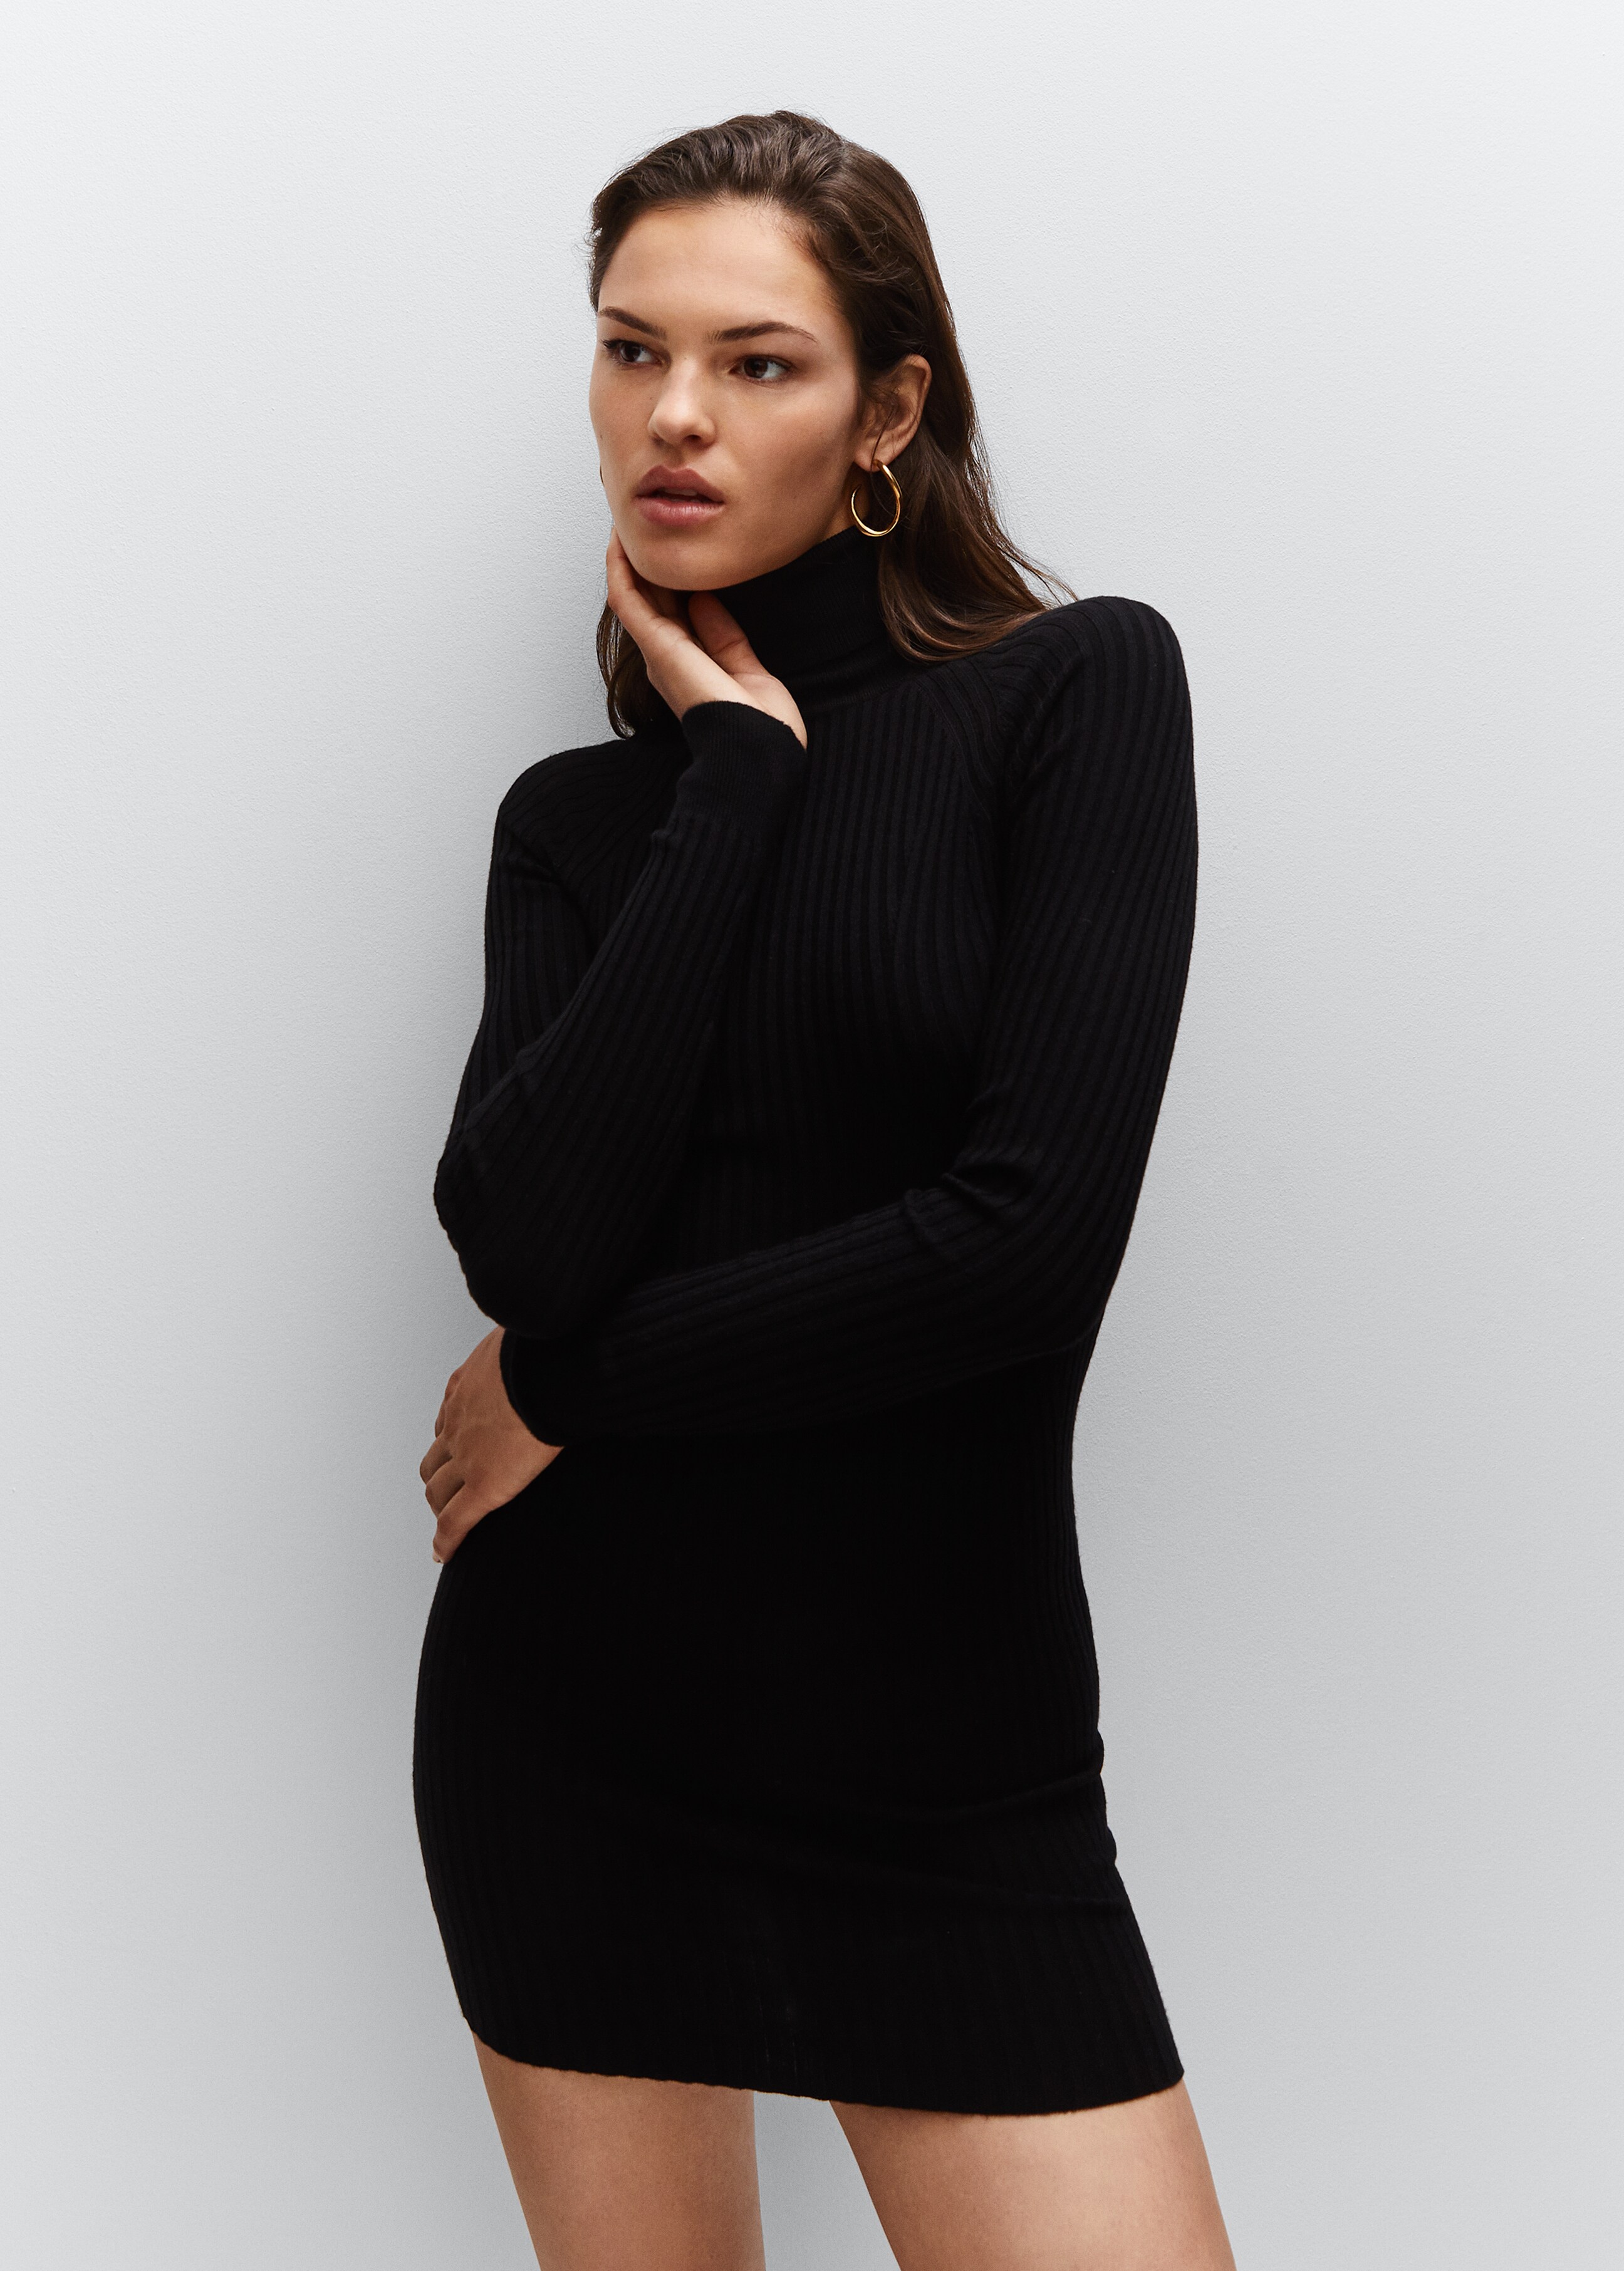 Ribbed knit dress - Details of the article 6